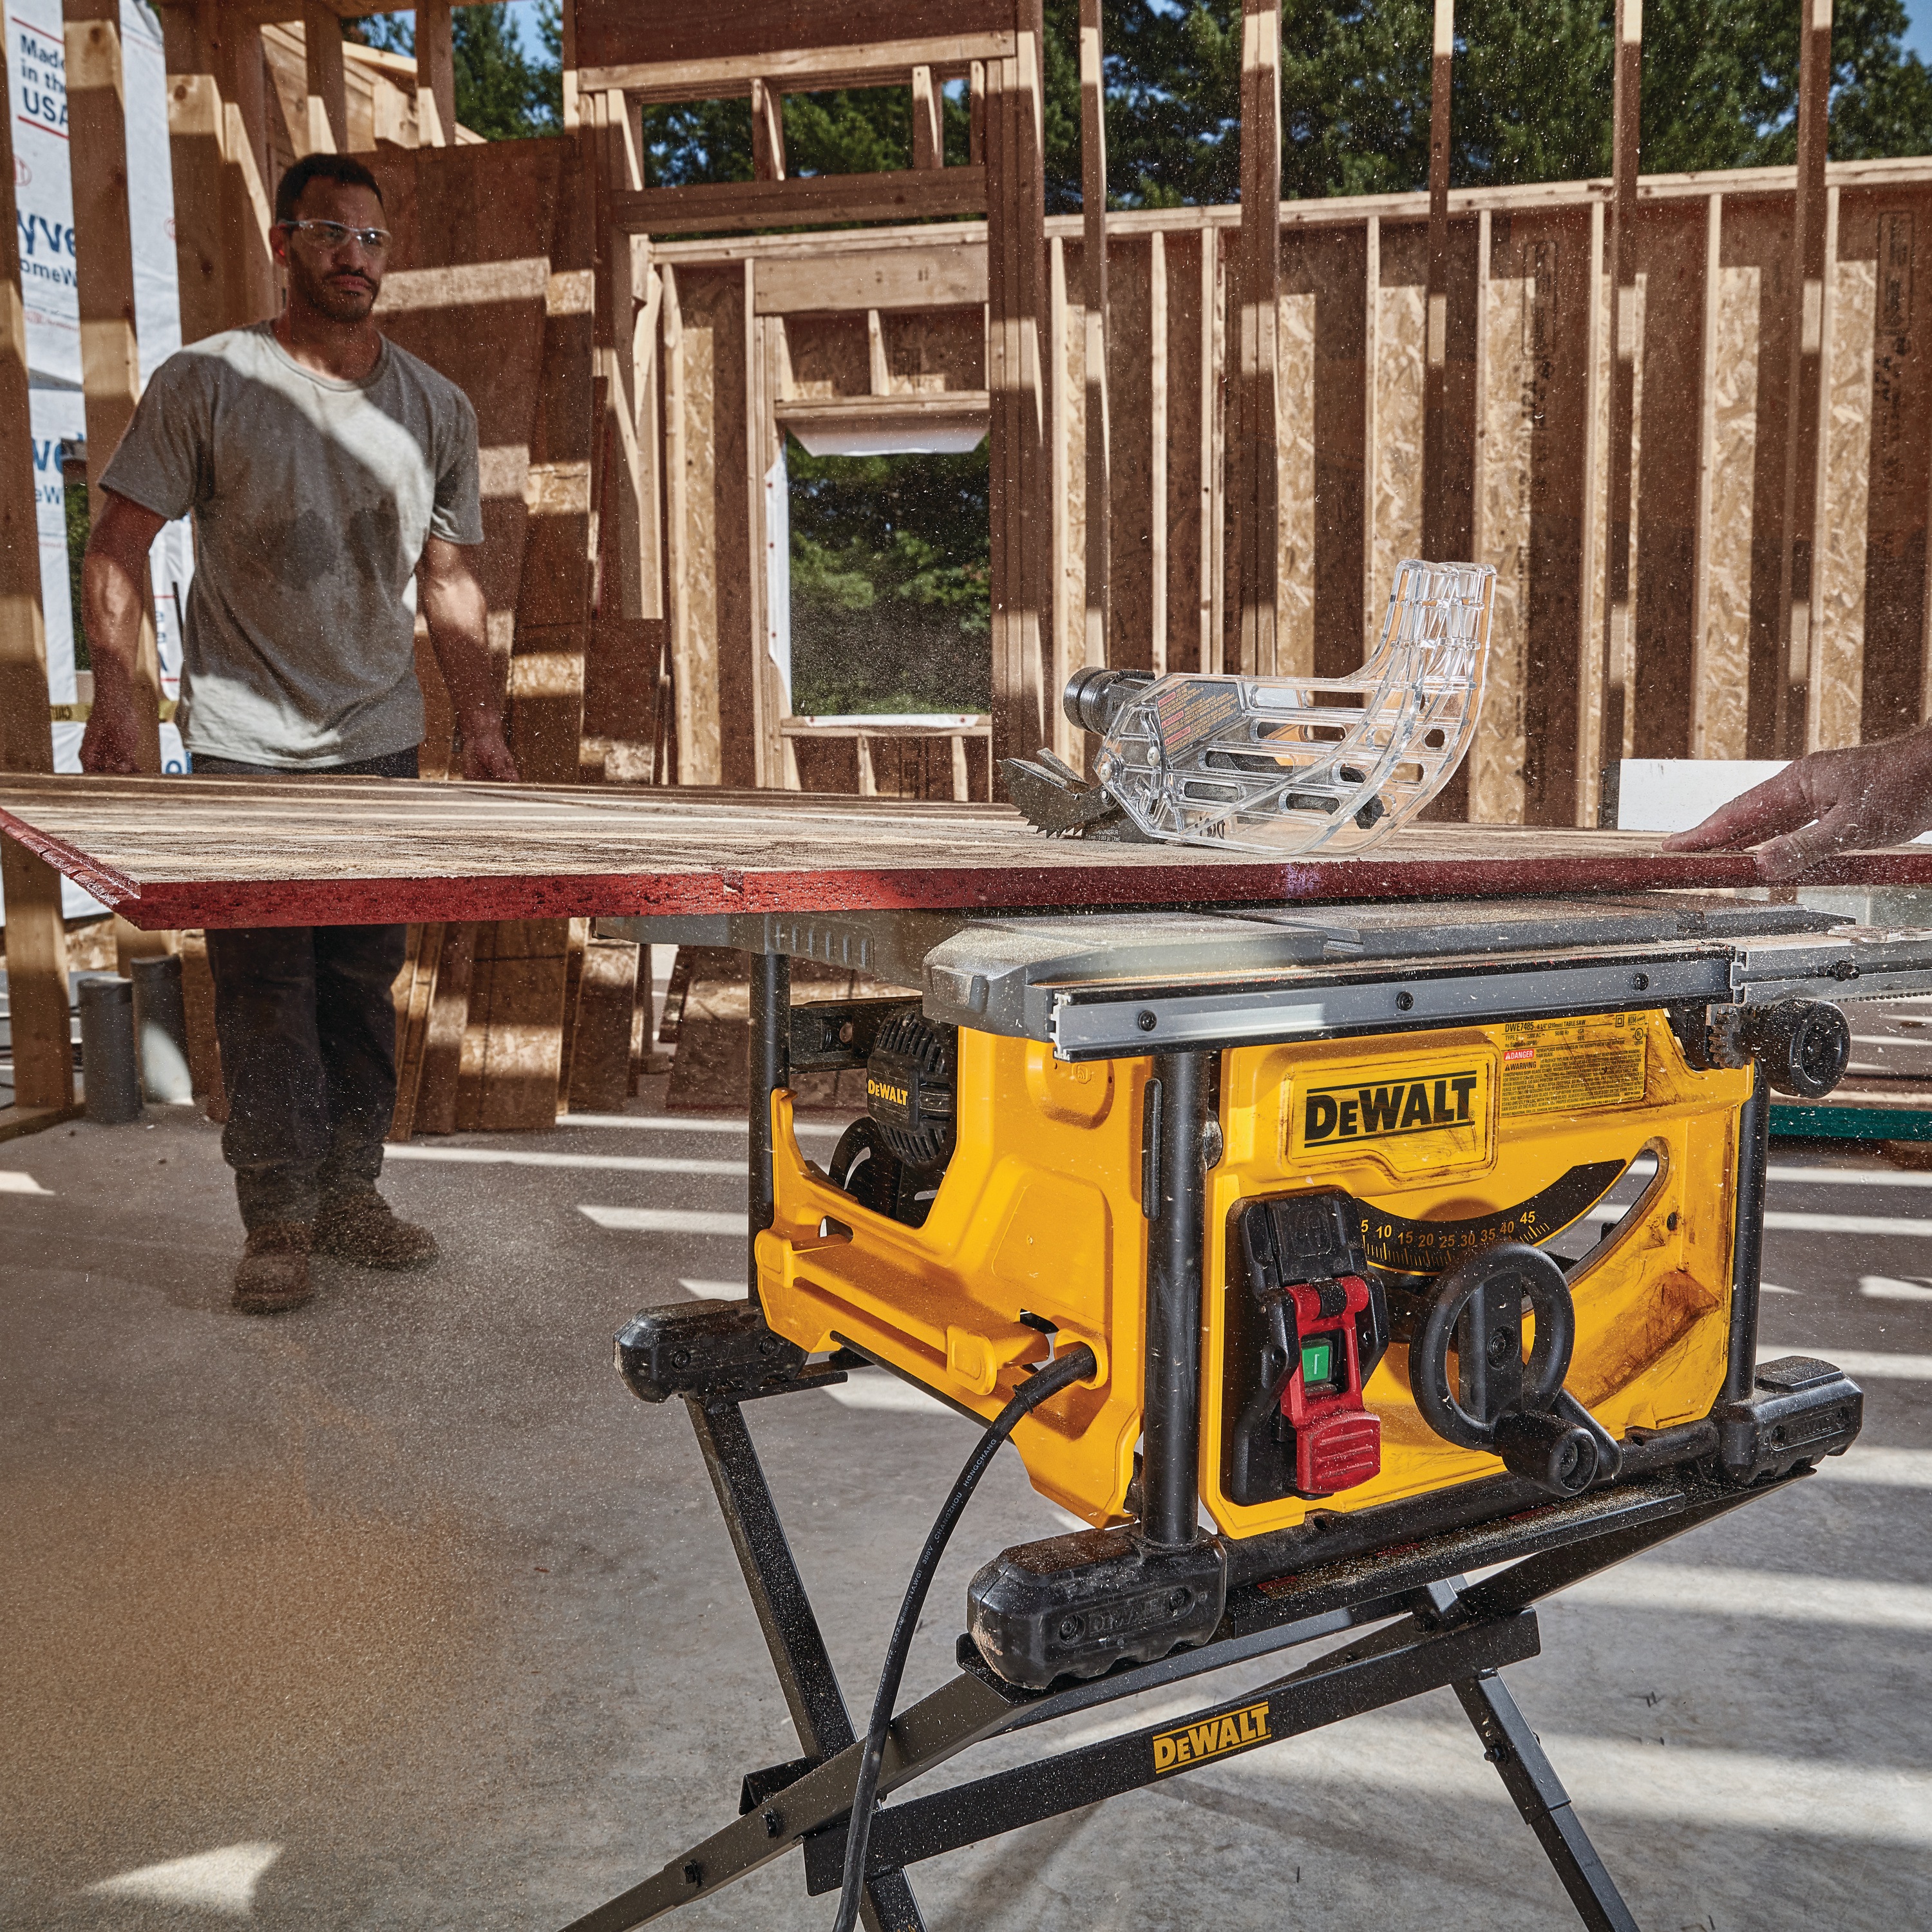 8 and one fourth inch compact table site saw being used to cut a sheet of wood by workers at a worksite.